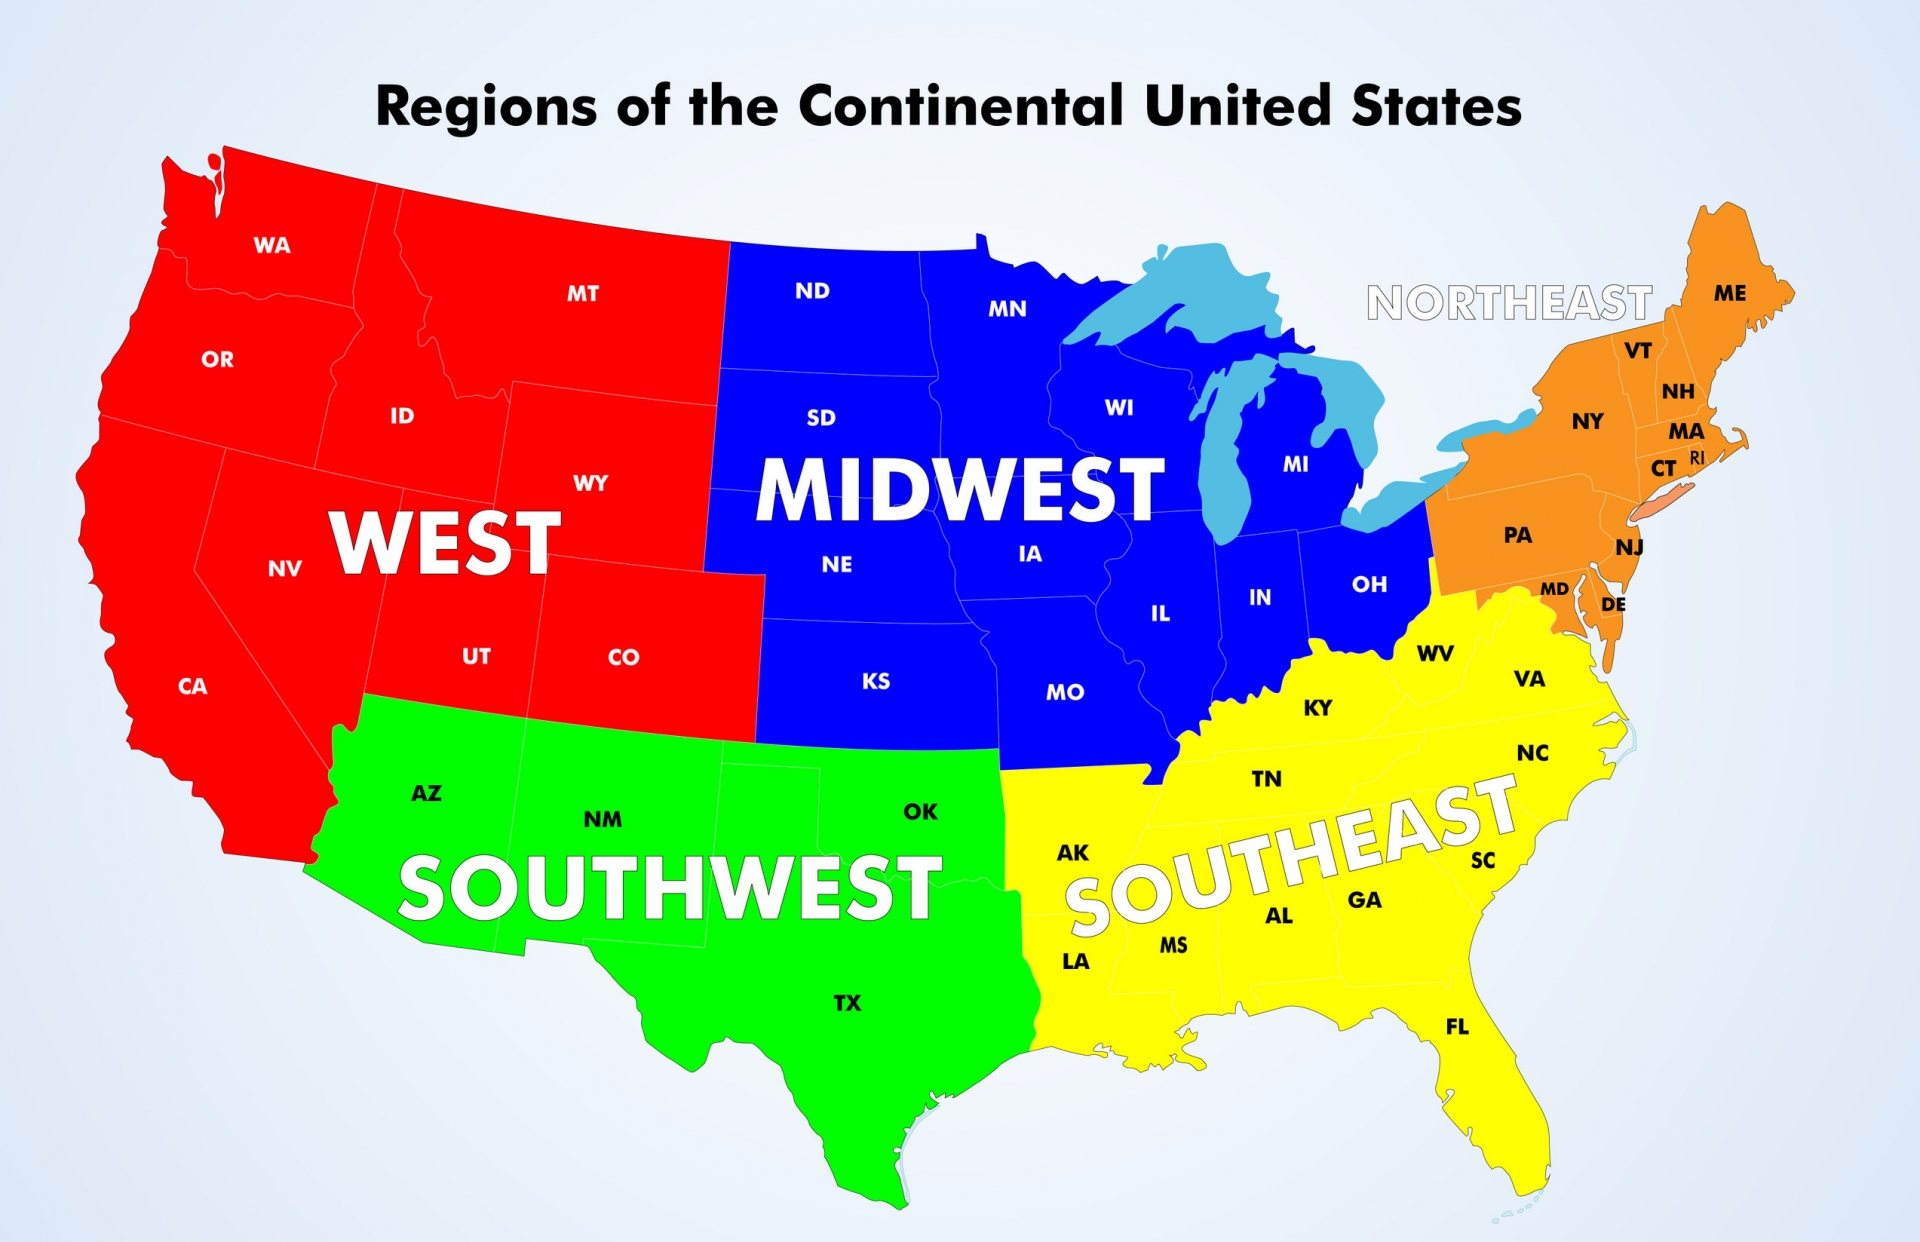 How many Regions Are There In the U.S? Photo: Mappr 